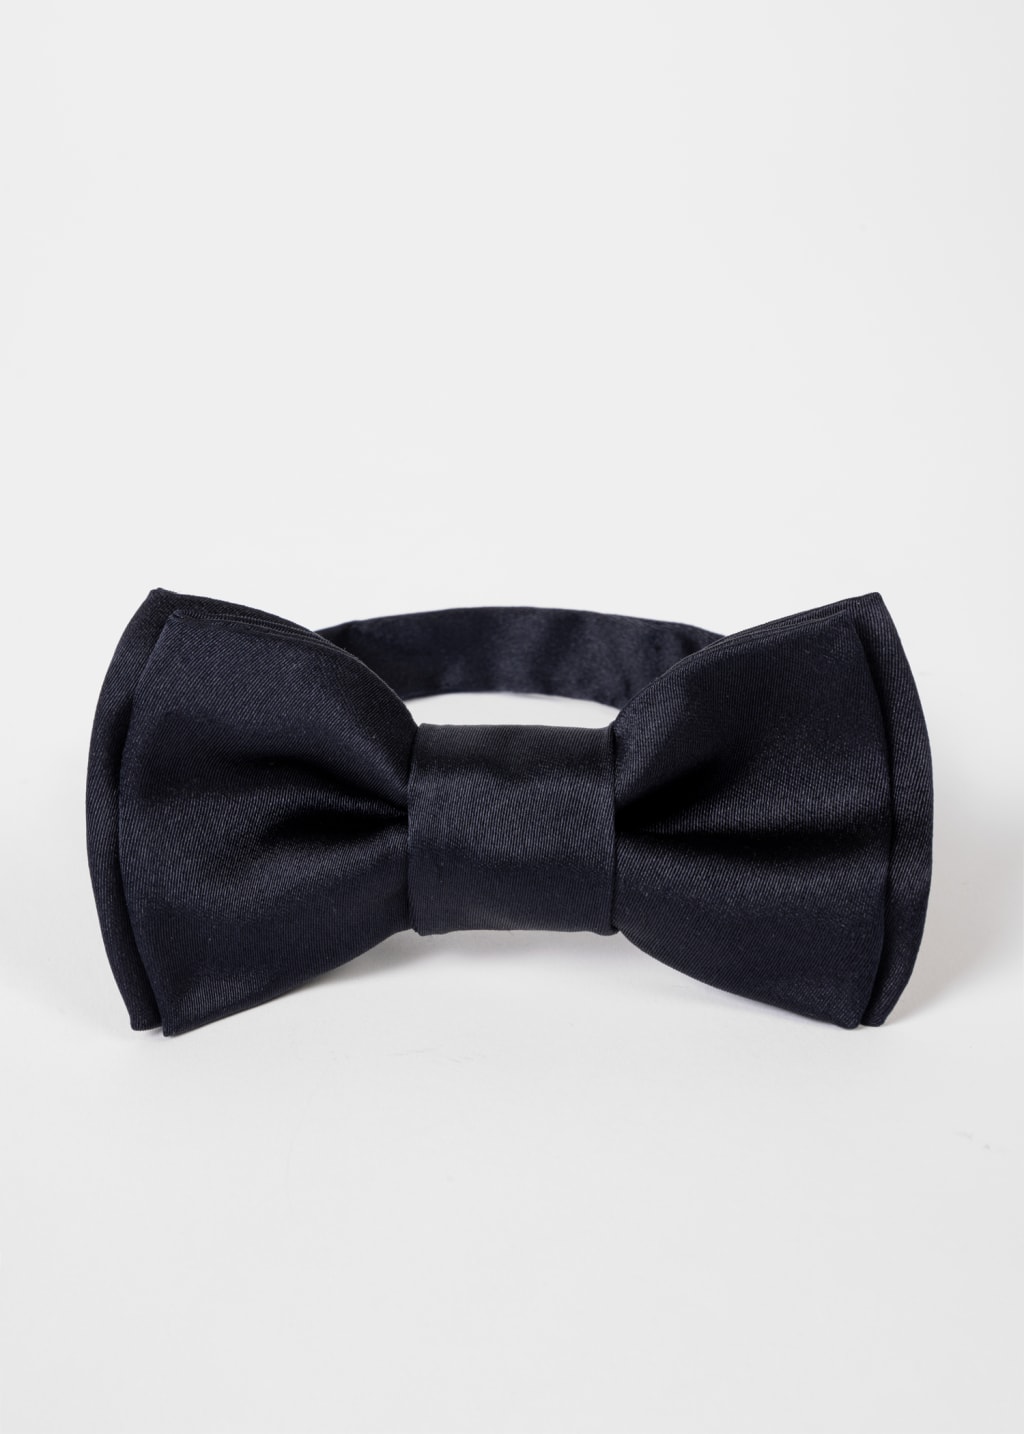 Front View - Navy Pre-Tied Silk Bow Tie Paul Smith